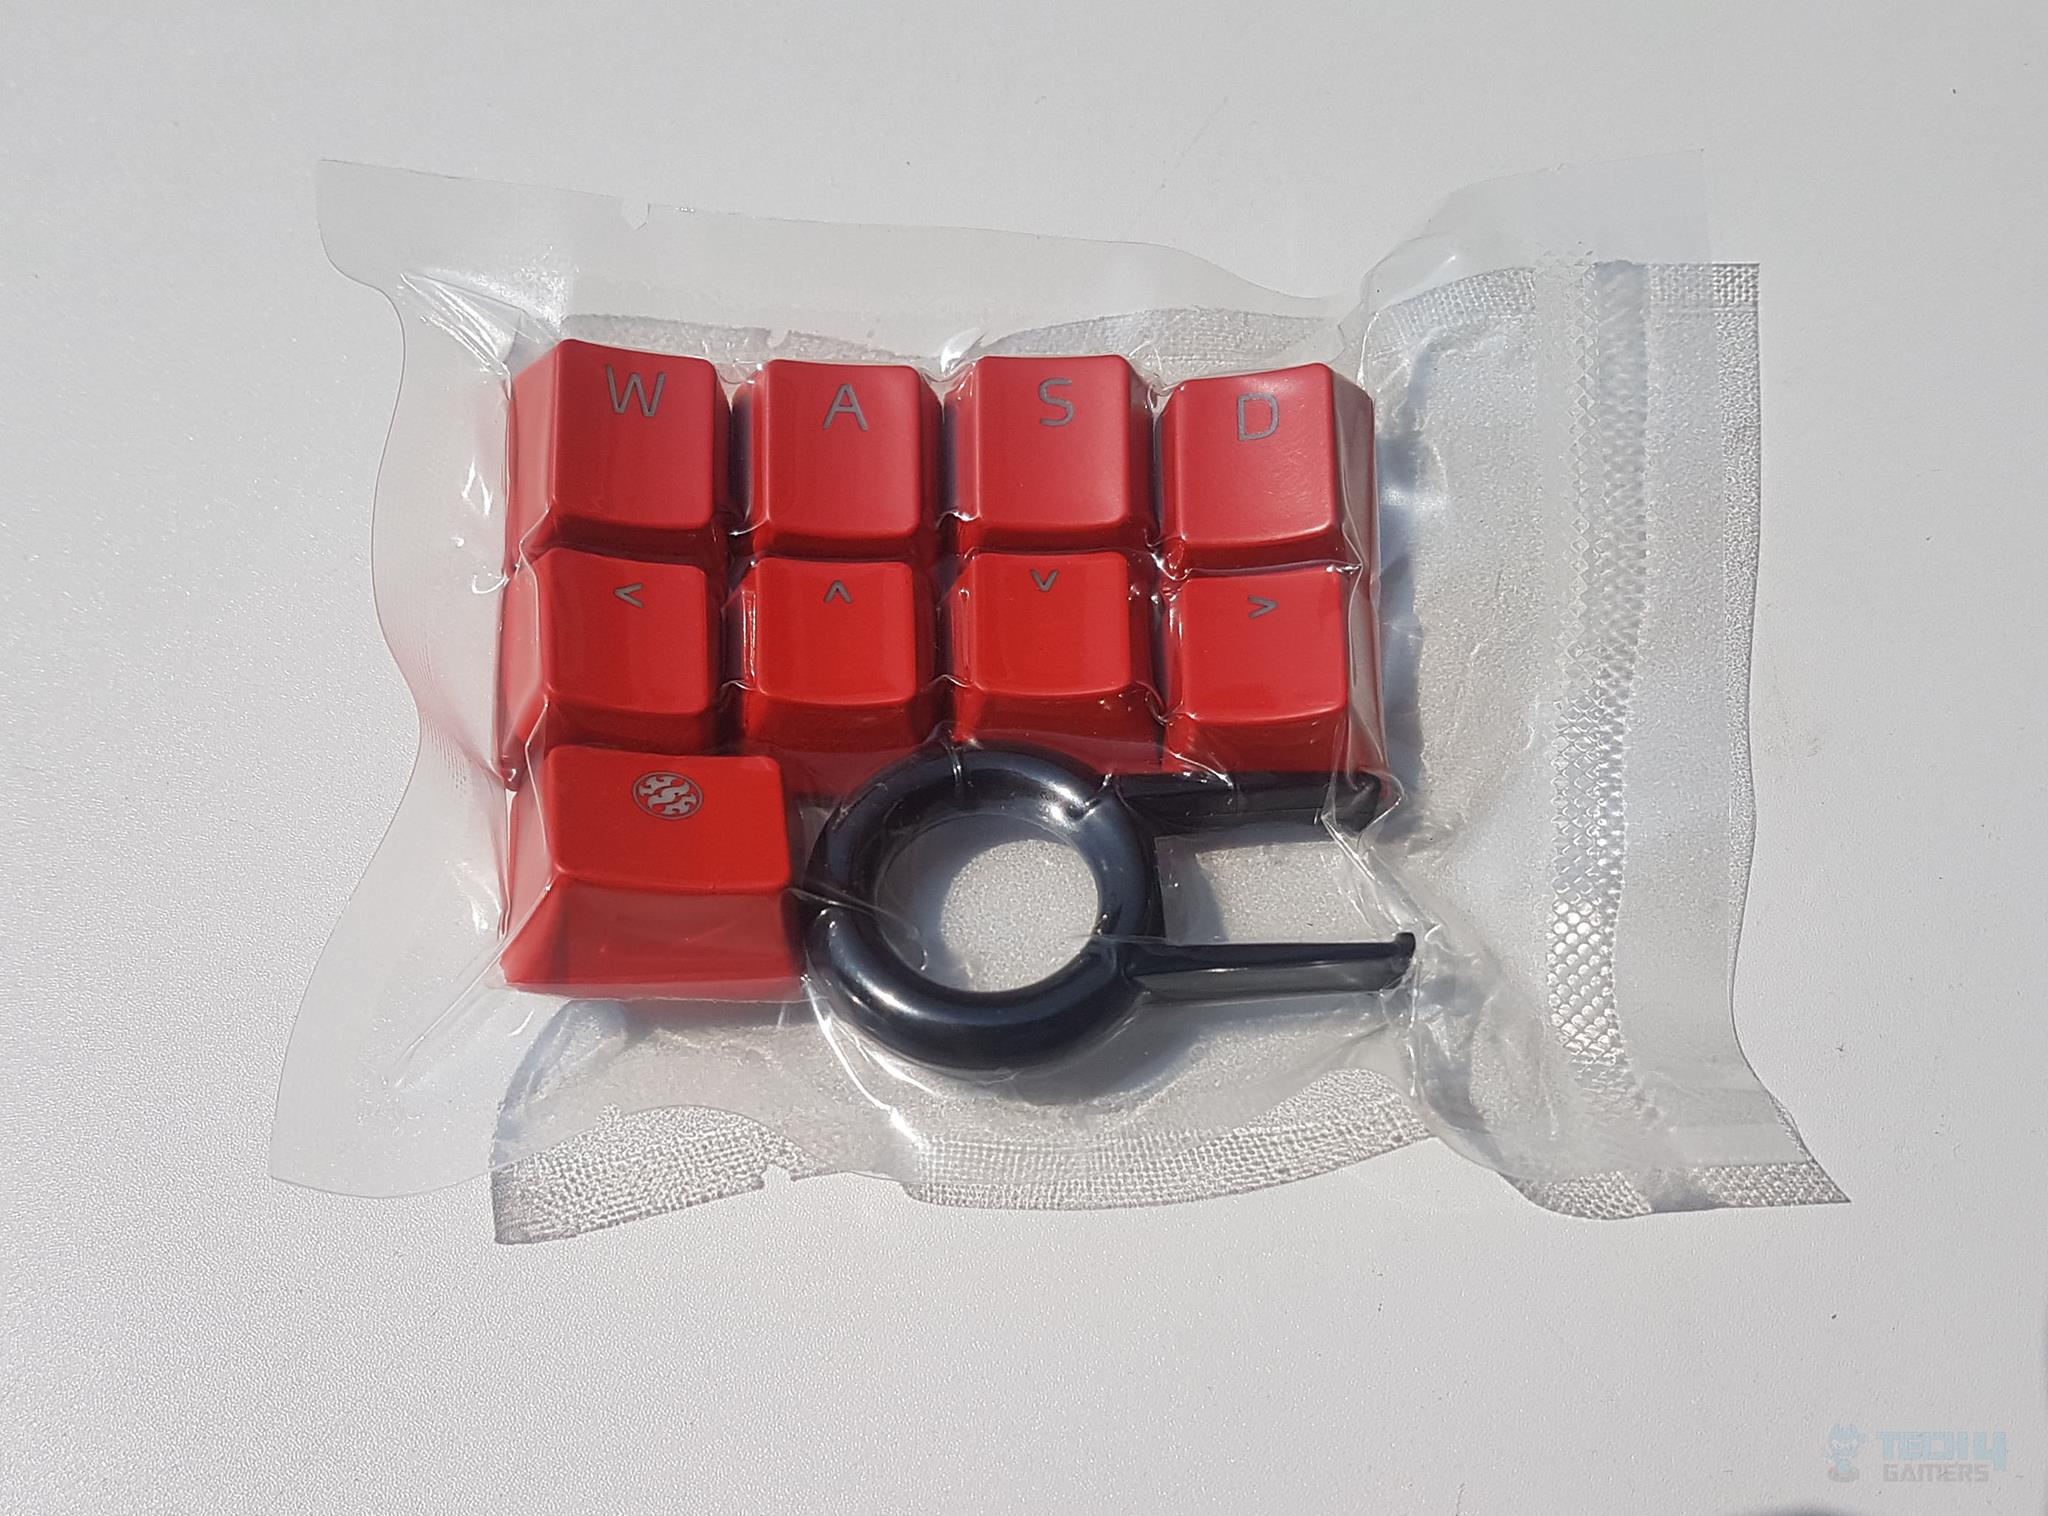 xpg keyboard Red colored keycaps 